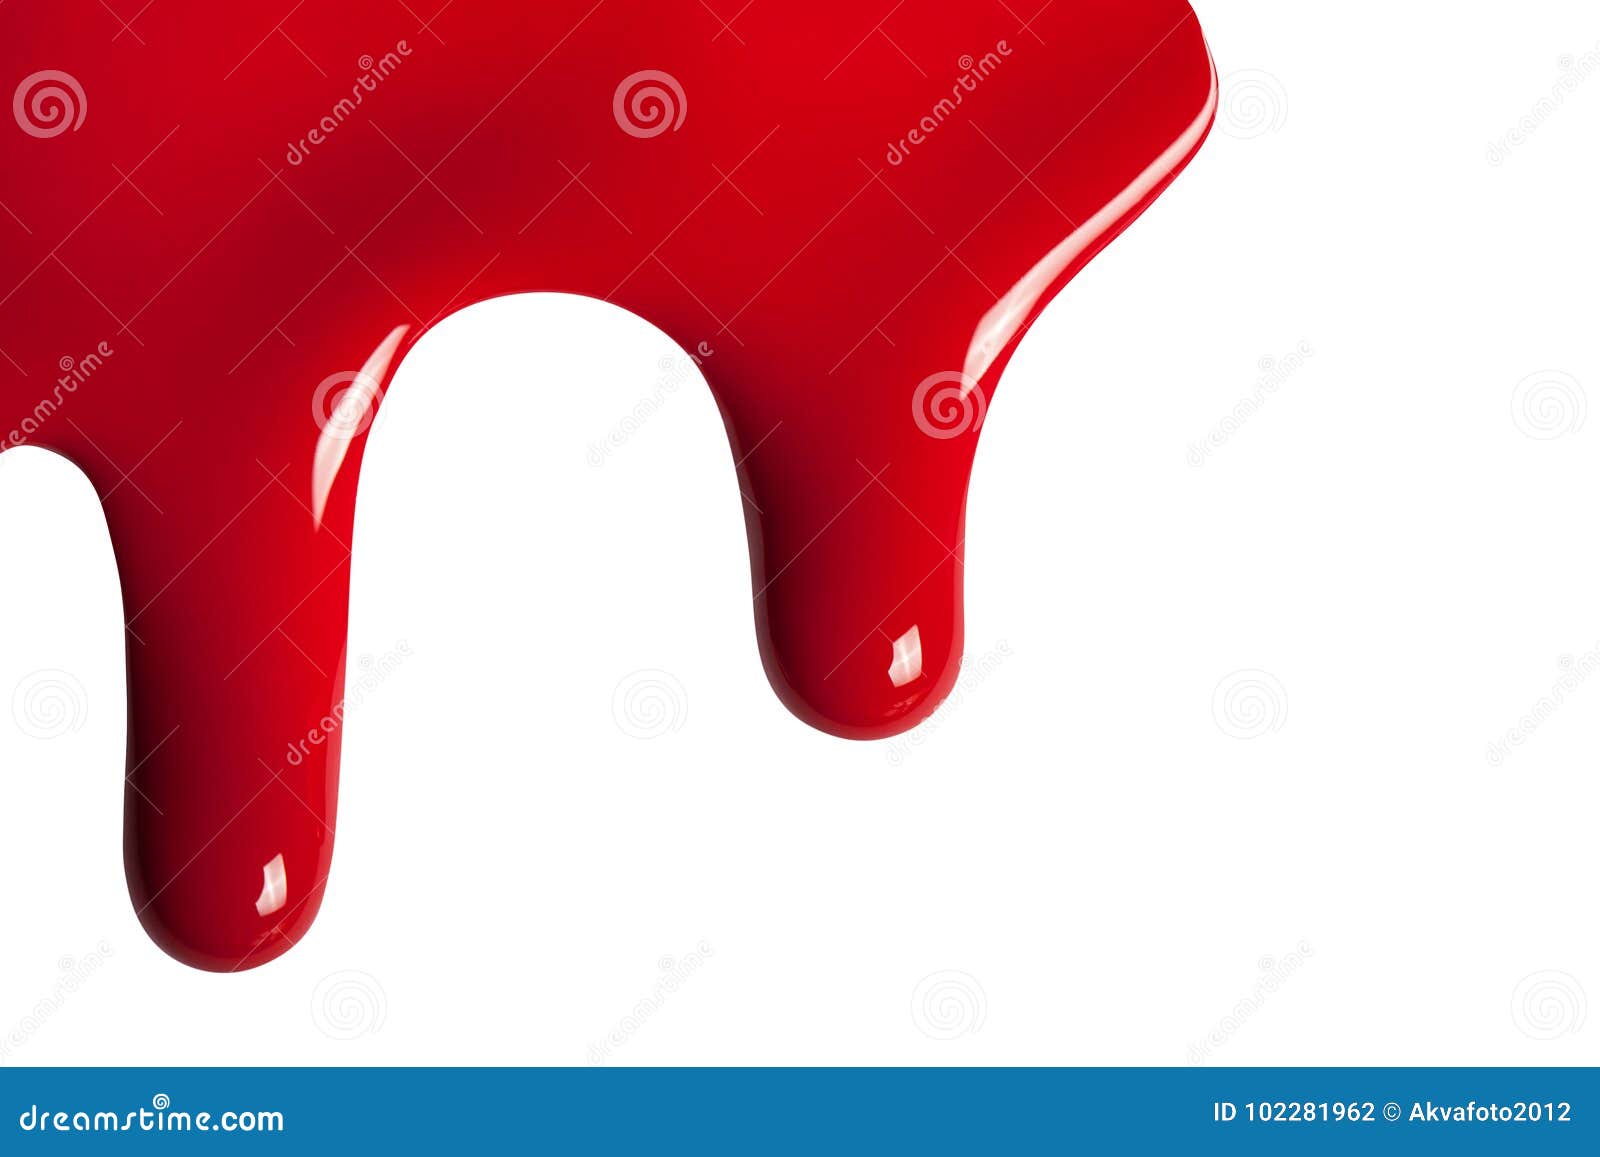 Beautiful Drip Paint Close Up. Drip Red Paint Stock Photo - Image of ...